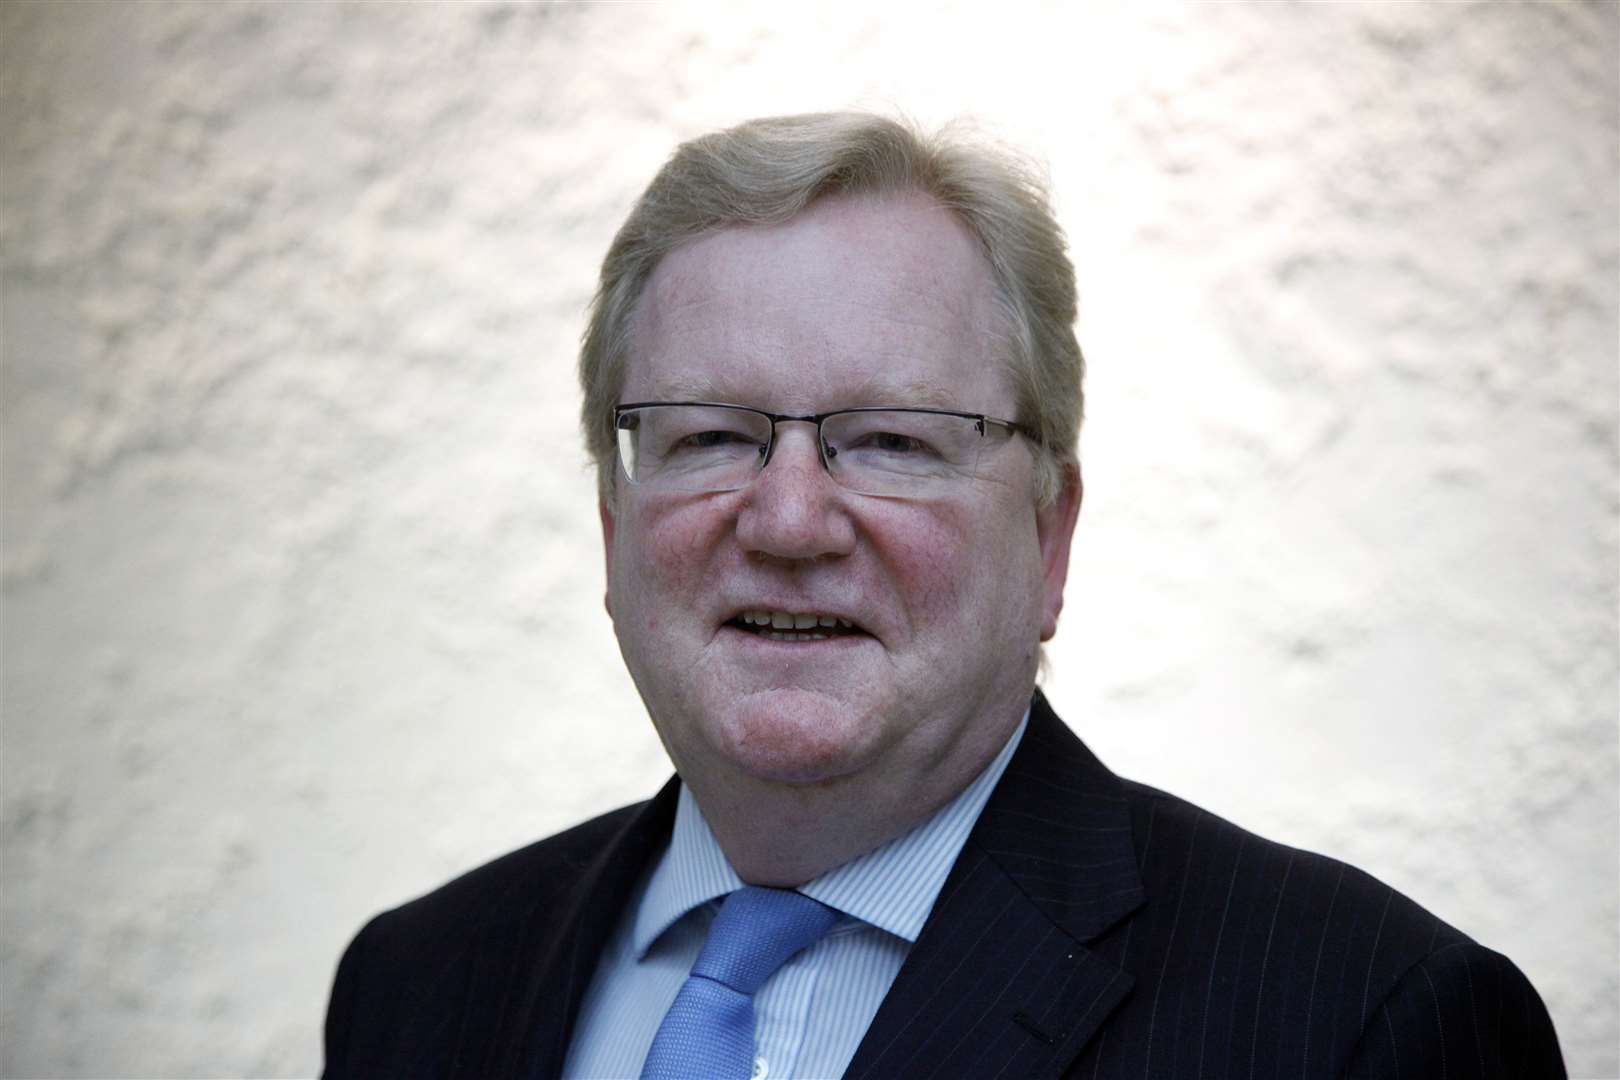 Convener of the Citizen Participation and Public Petitions Committee, Jackson Carlaw MSP